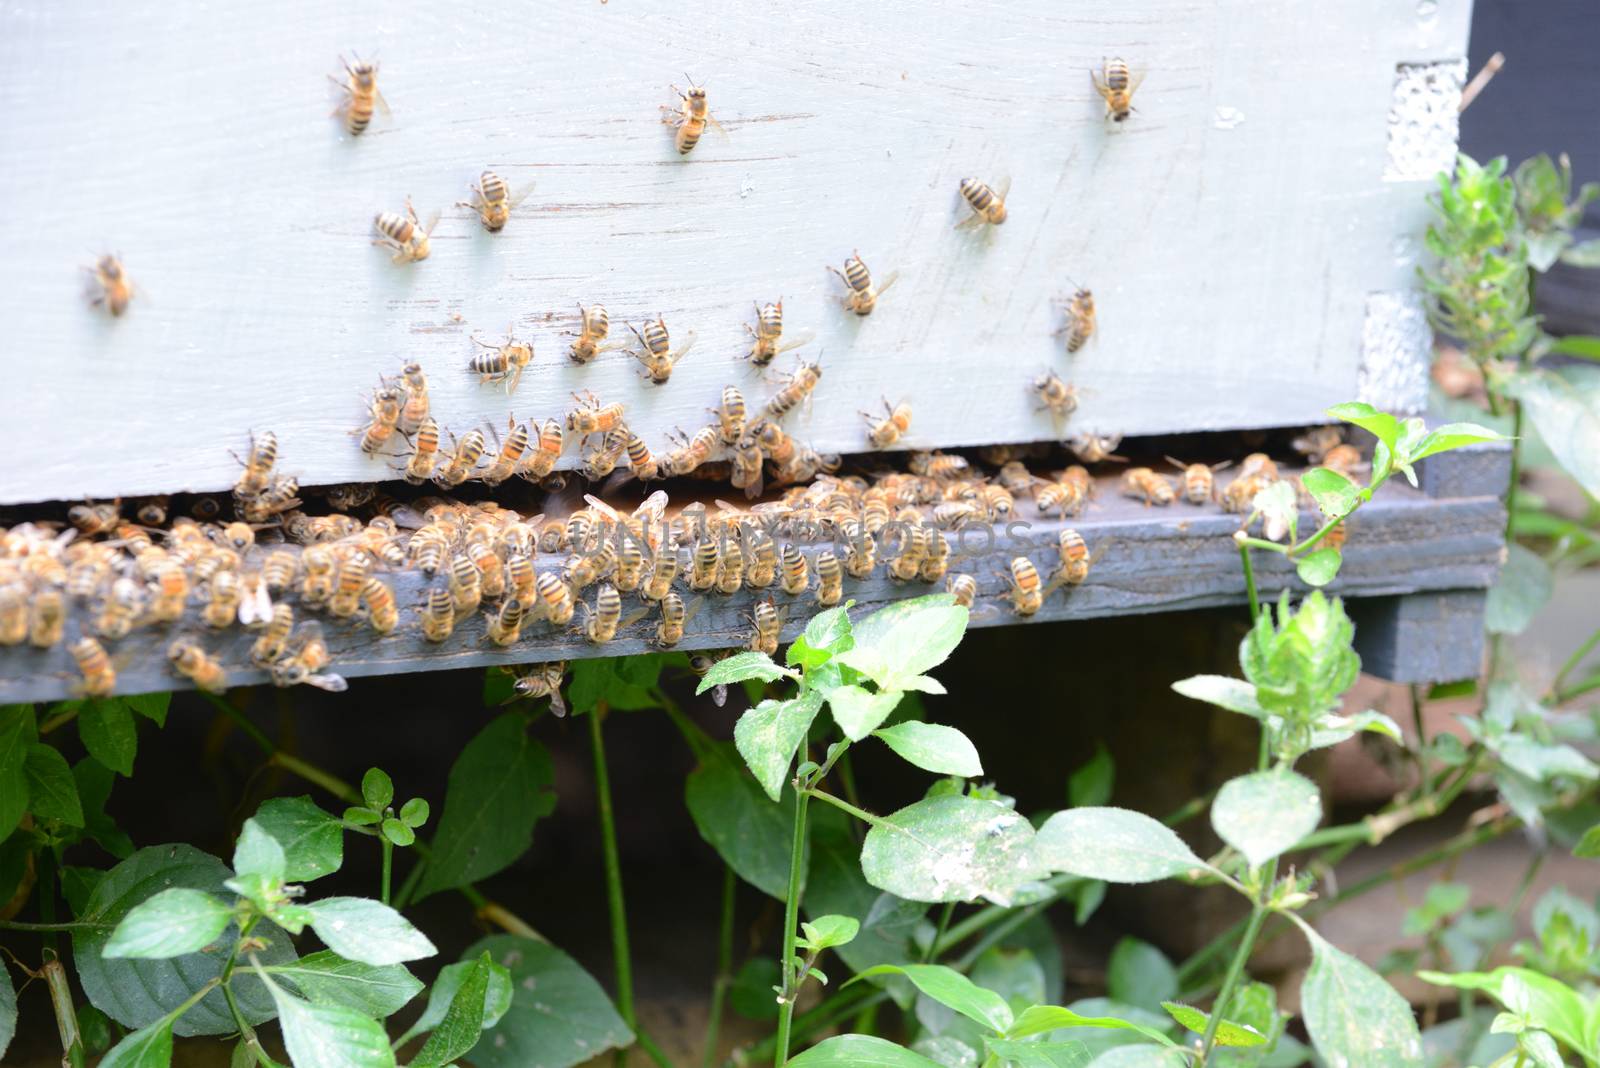 swarm of honey bees on man-made hive